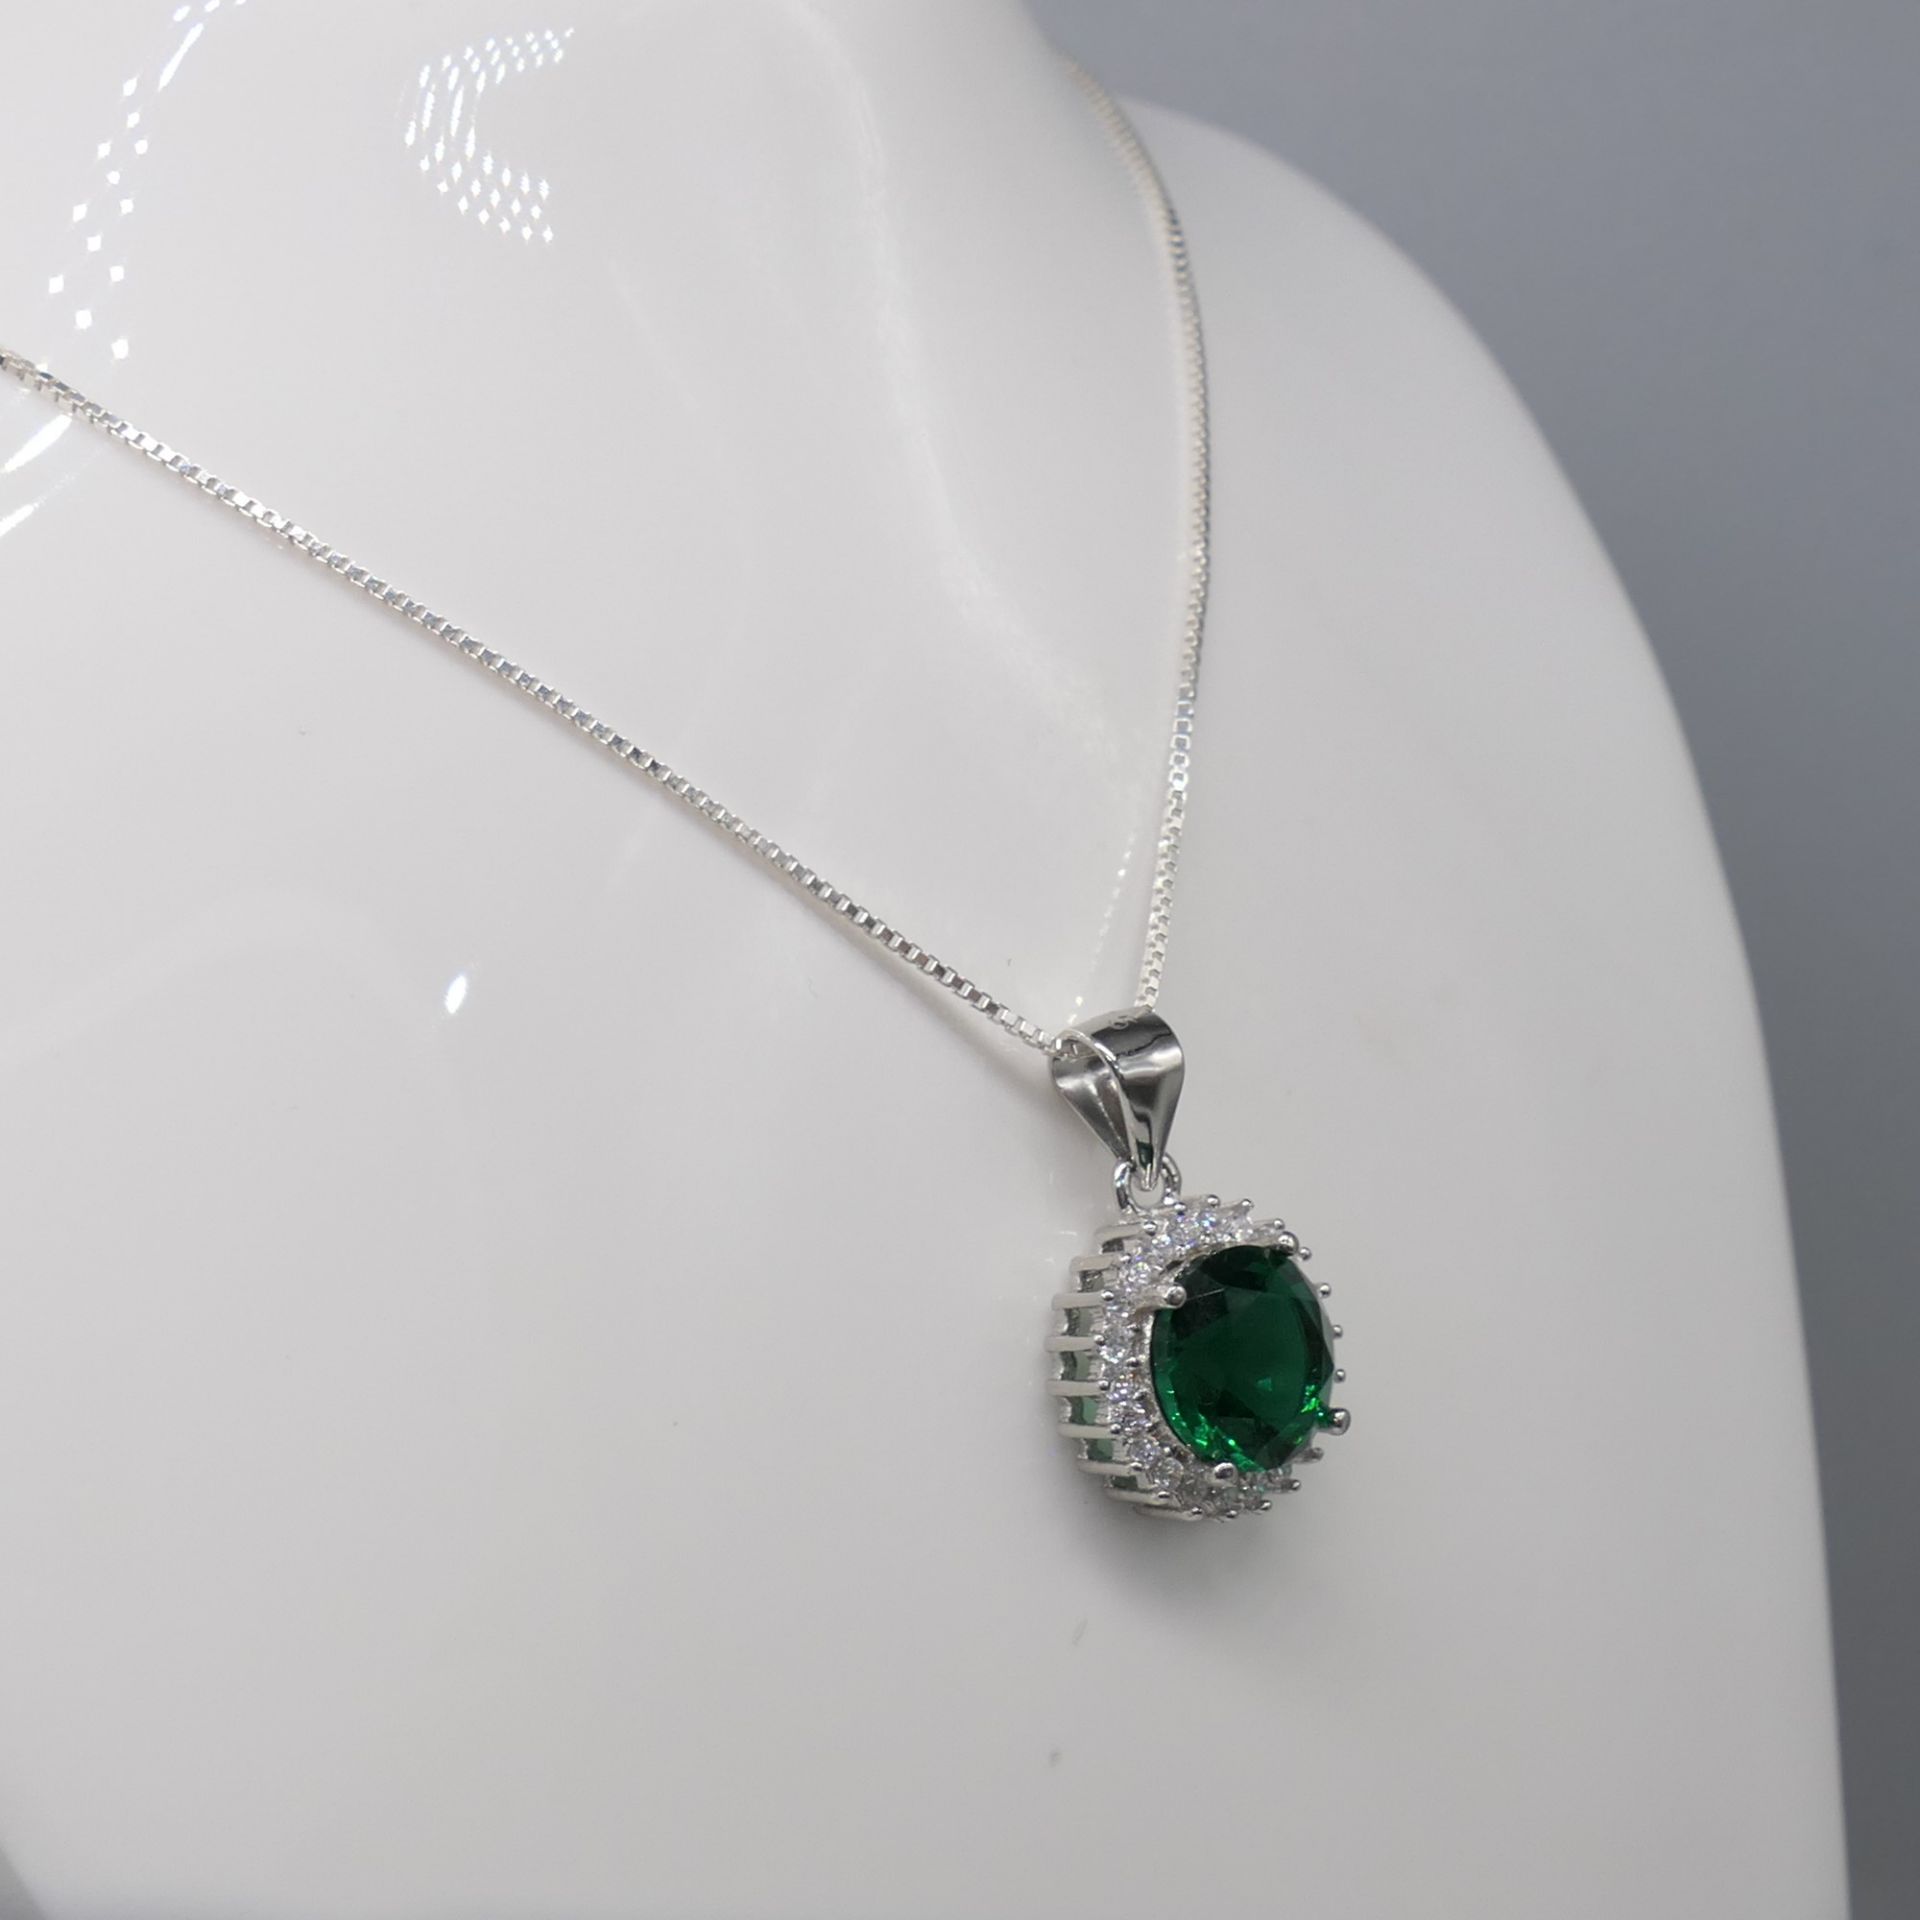 Green gem pendant and chain in sterling silver - Image 4 of 6